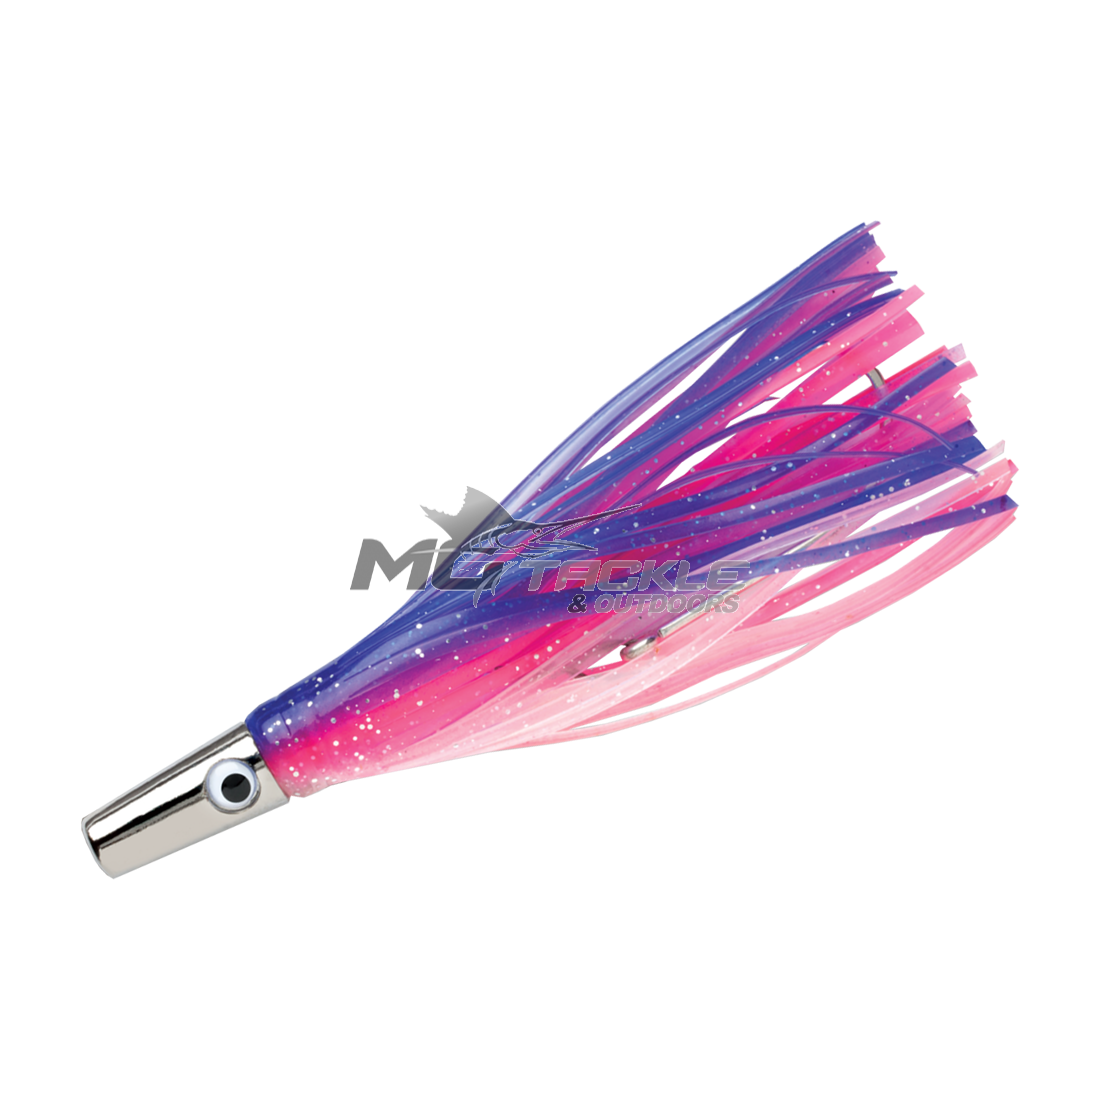 Williamson Lures Rigged Wahoo Catcher Lure